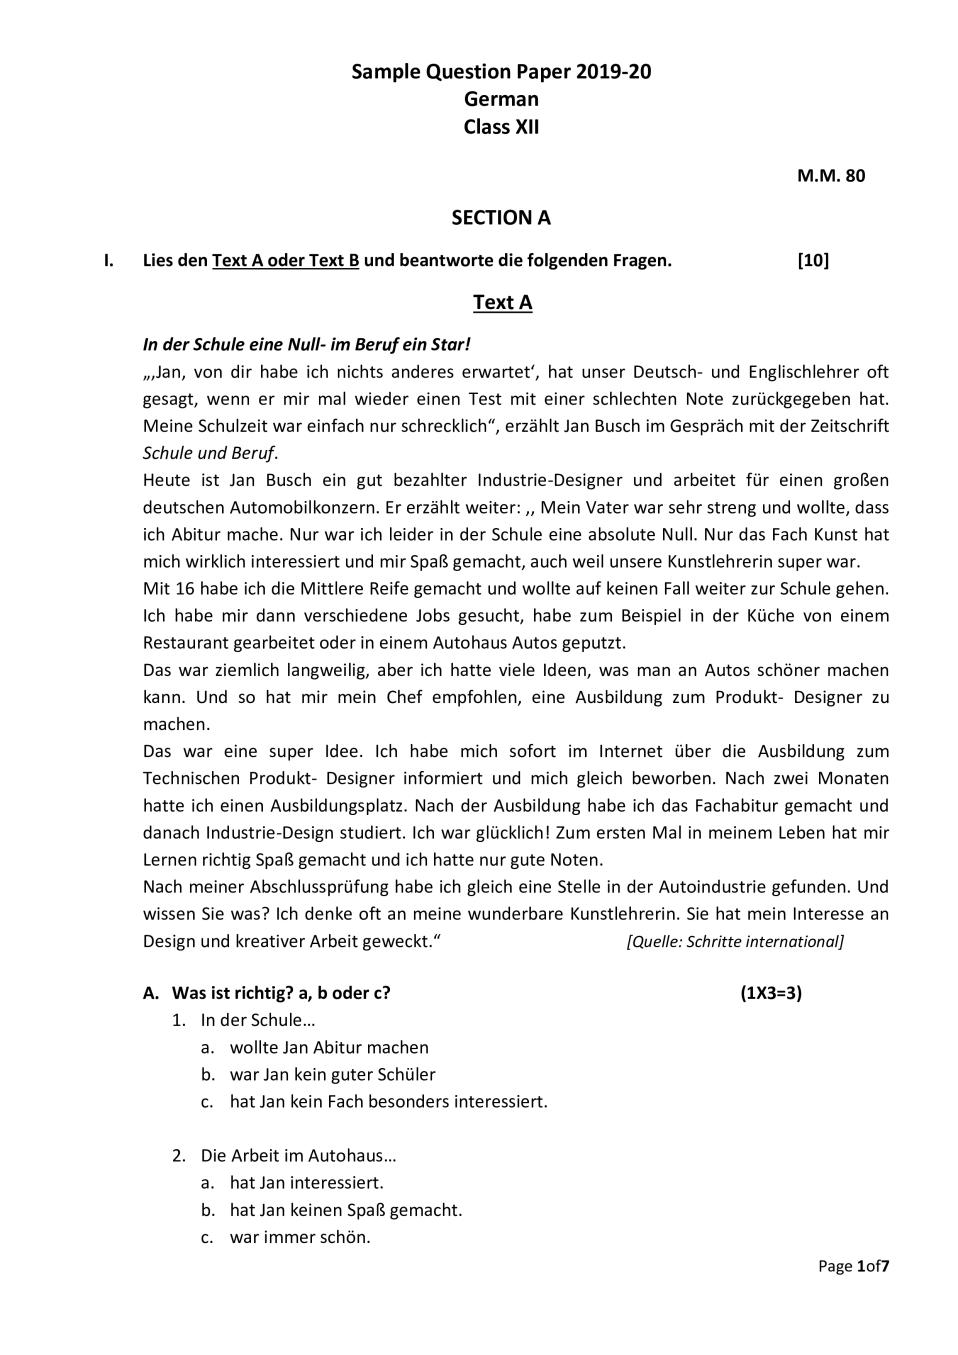 CBSE Class 12 Sample Paper 2020 for German - Page 1